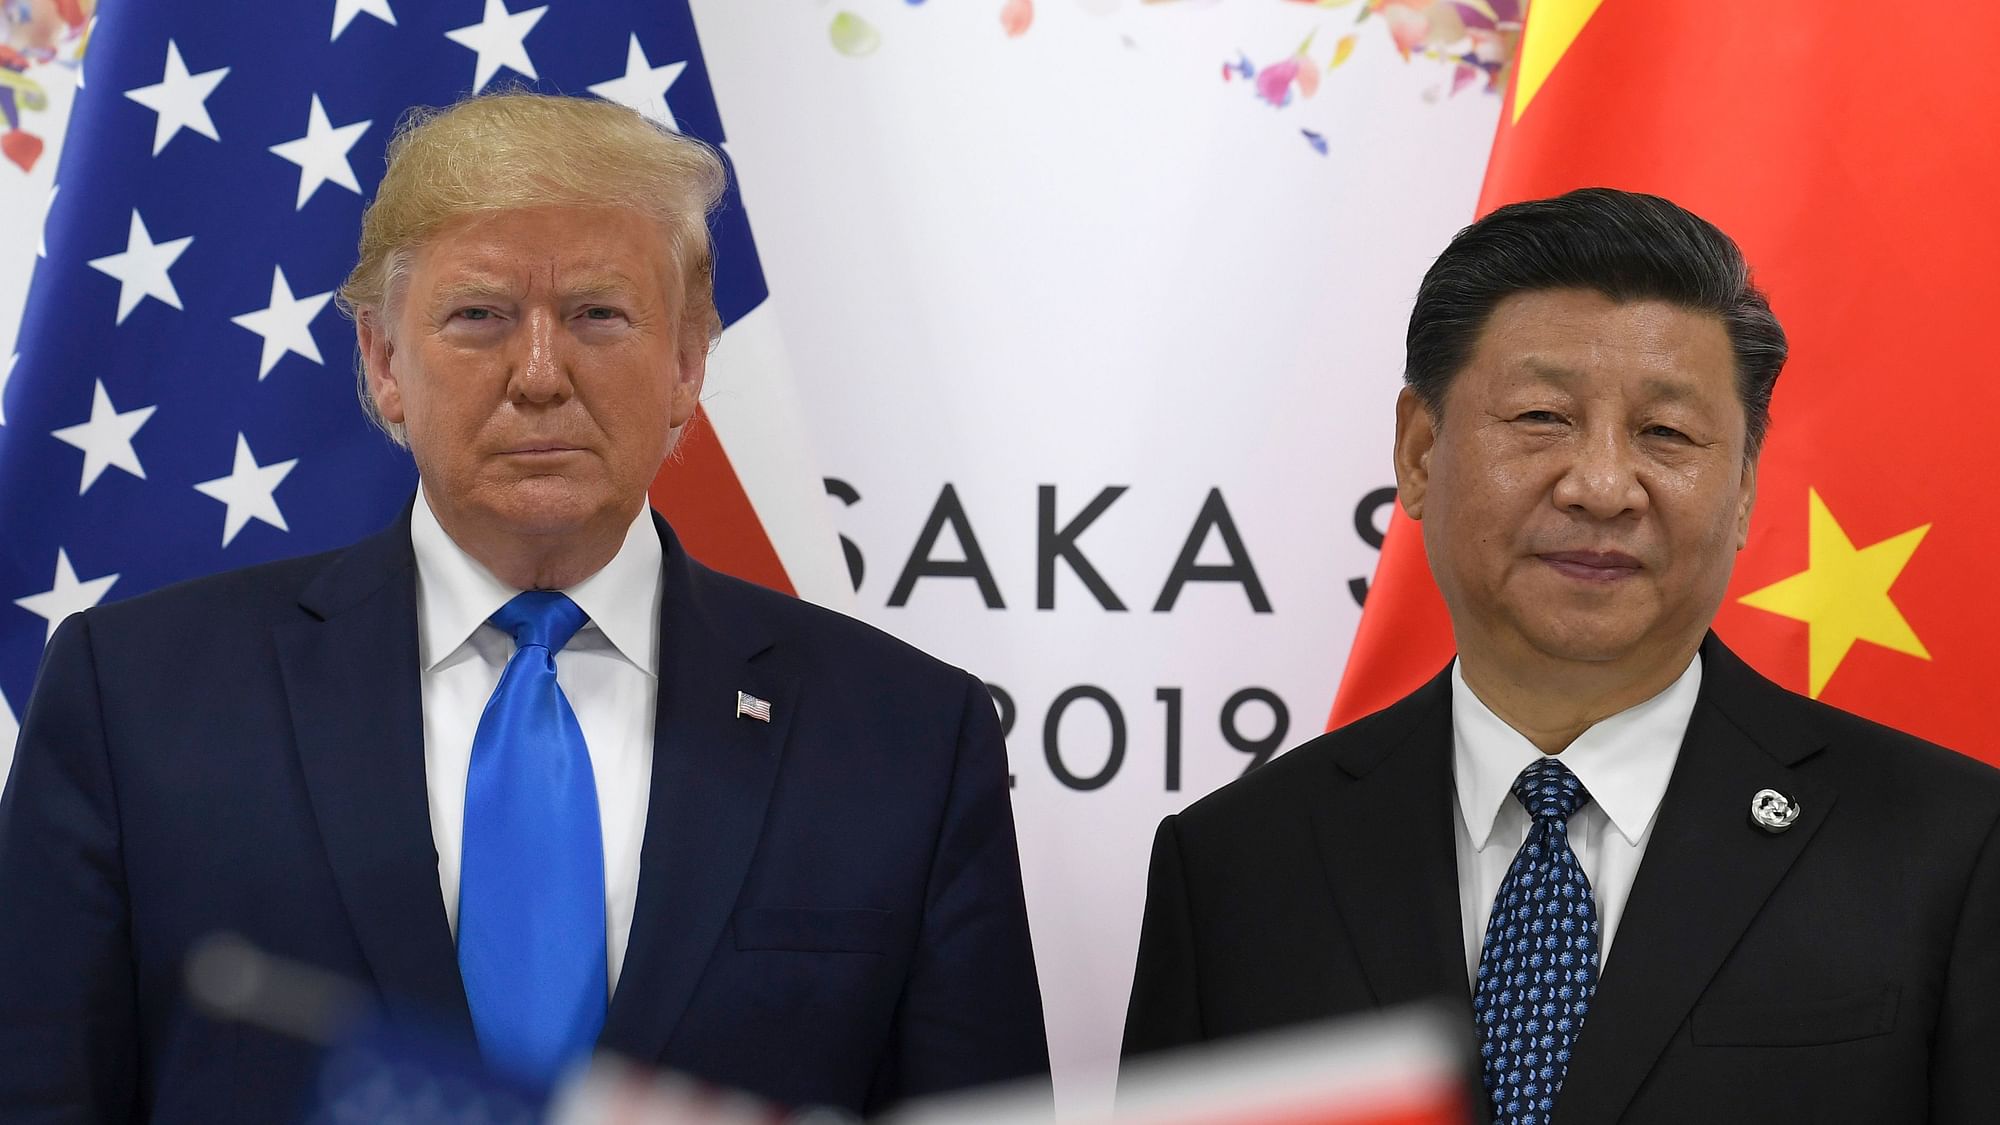 President Donald Trump, left, poses for a photo with Chinese President Xi Jinping during a meeting on the sidelines of the G-20 summit in Osaka, Japan, Saturday, June 29, 2019.